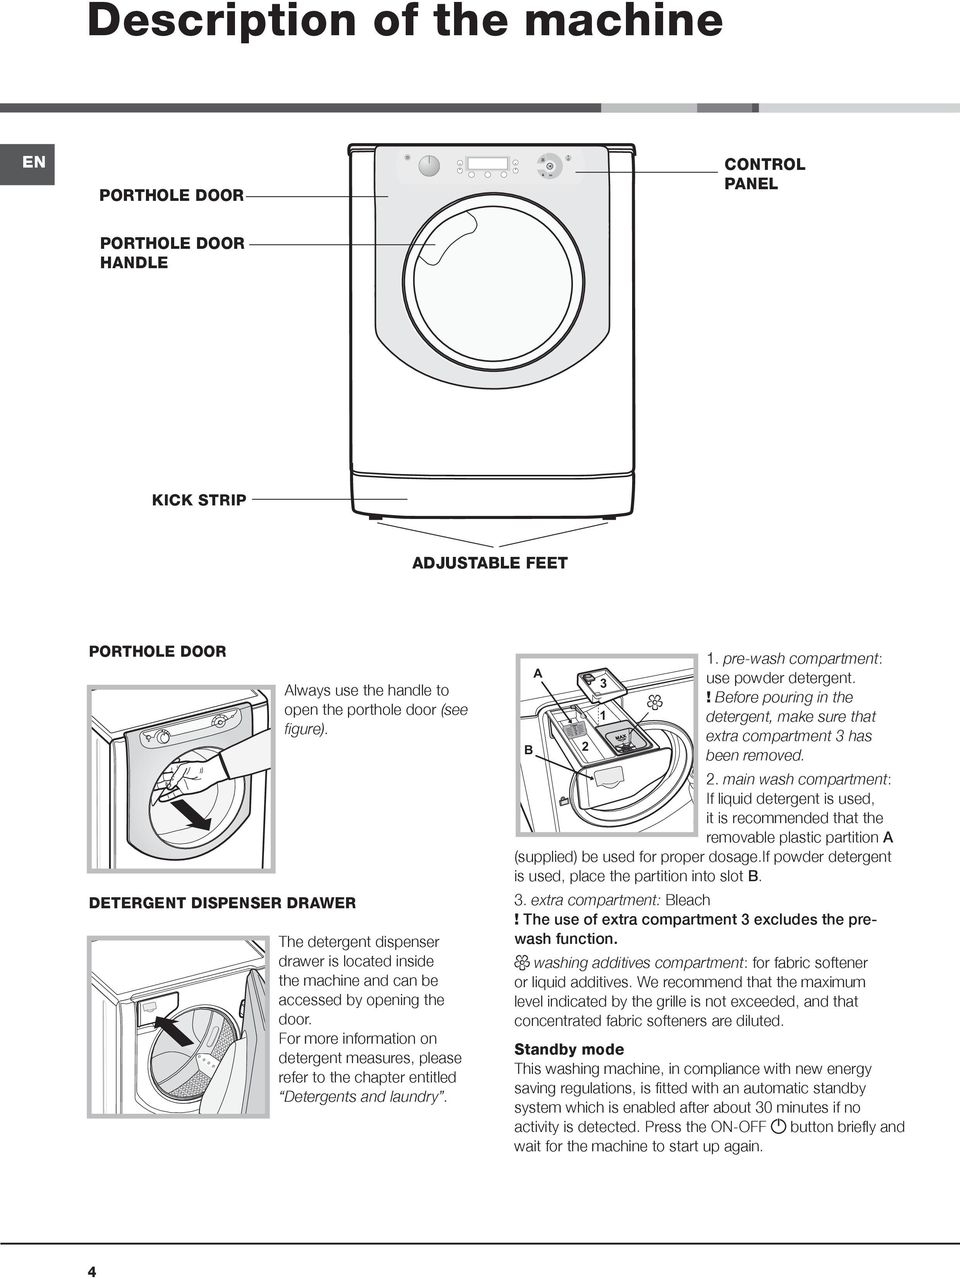 For more information on detergent measures, please refer to the chapter entitled Detergents and laundry. B A 2 3 1 1. pre-wash compartment: use powder detergent.